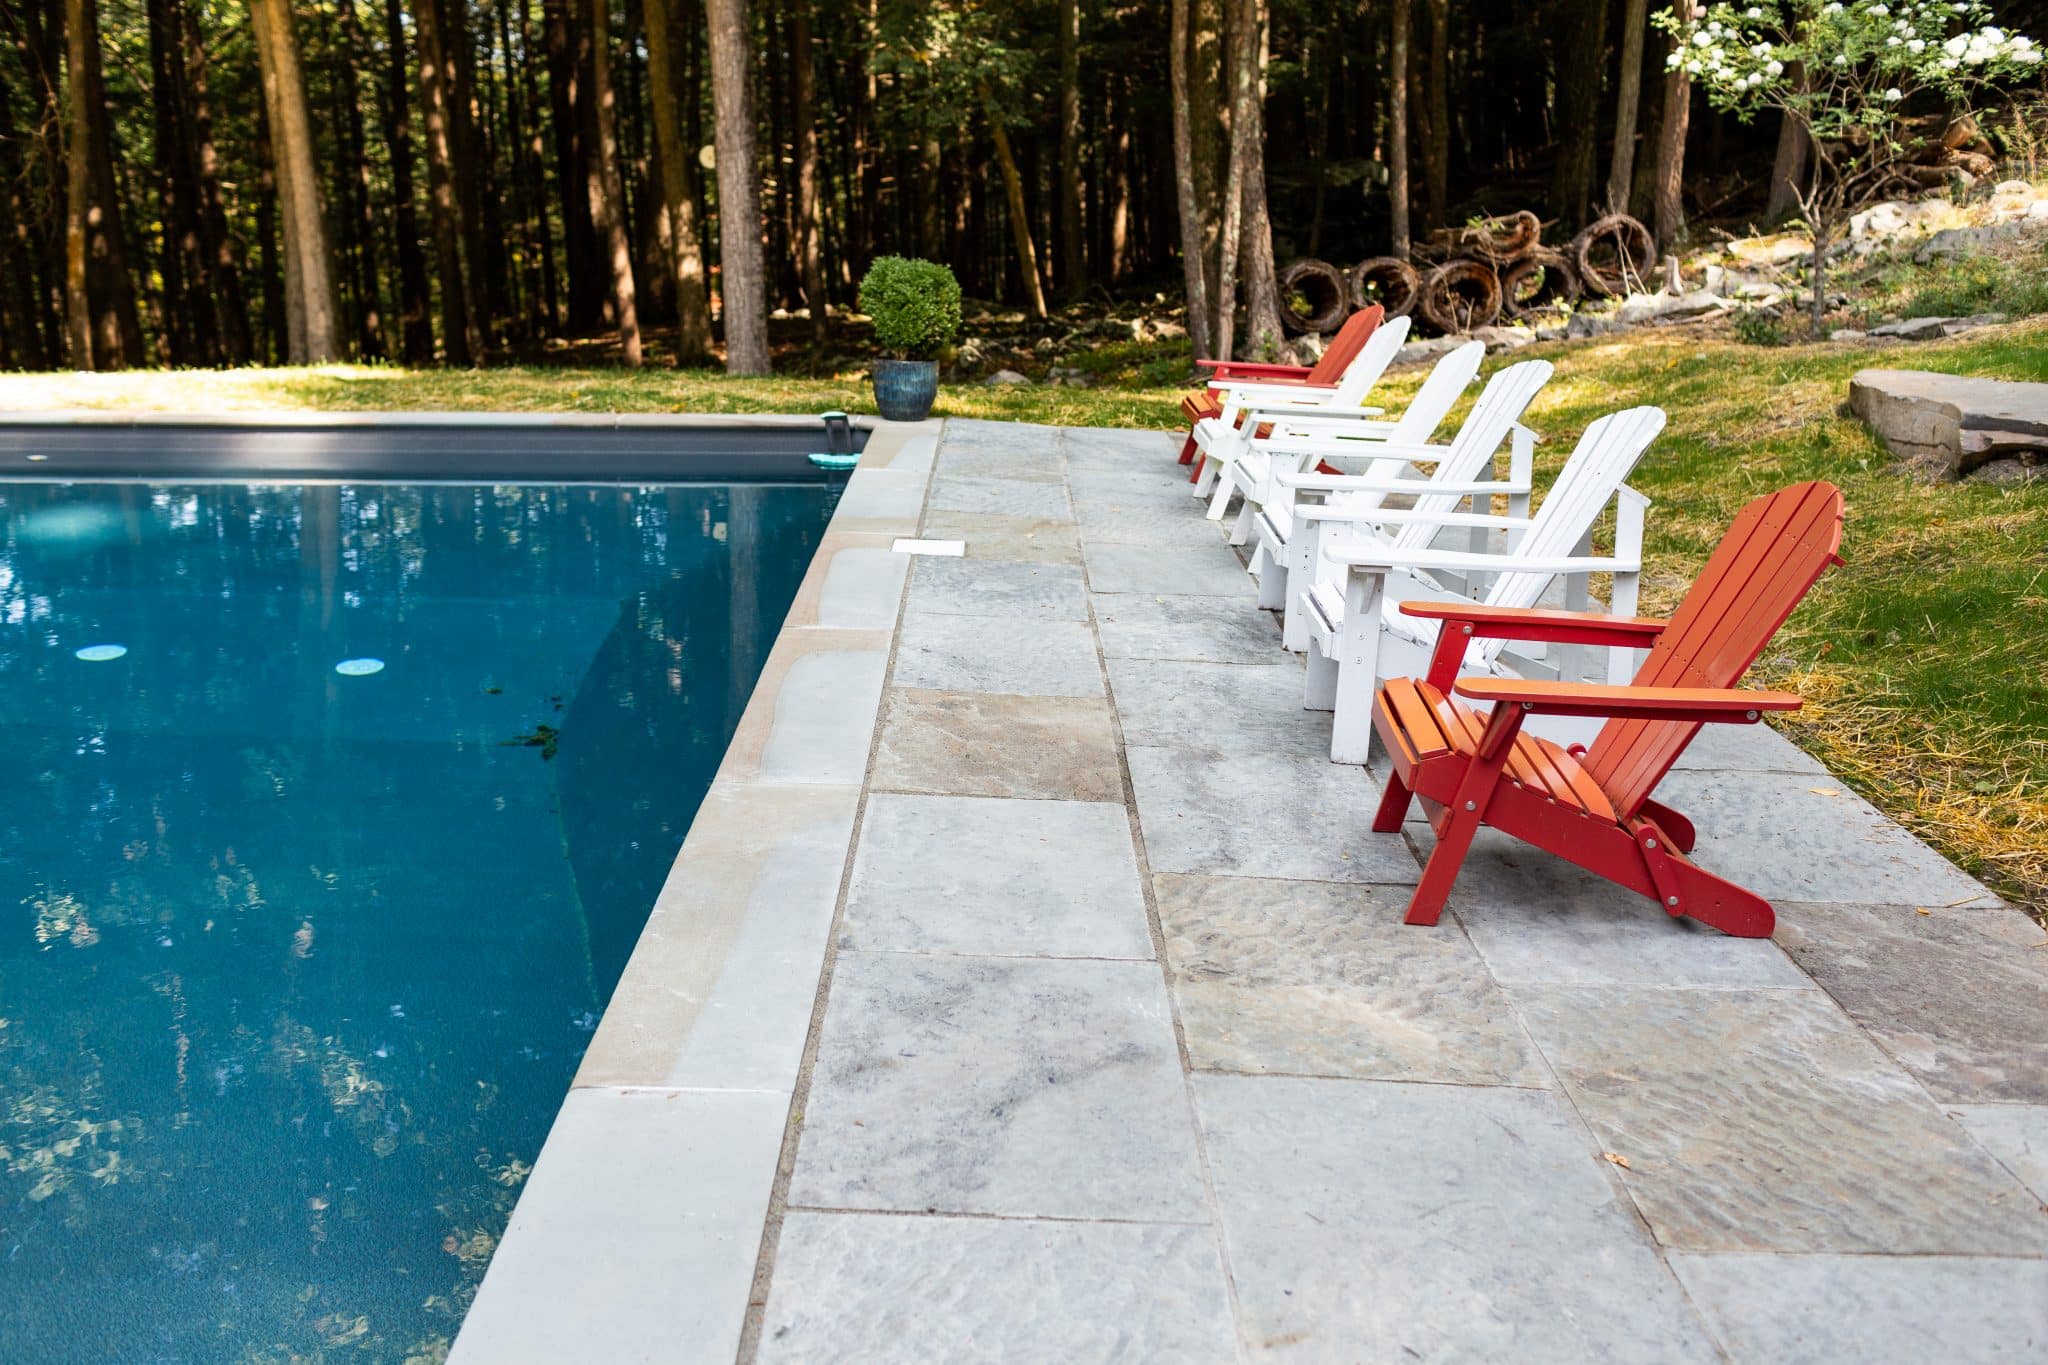 A geometric cut bluestone patio next to a pool with matching bluestone coping and colorful Adirondak chairs in Woodstock, NY.